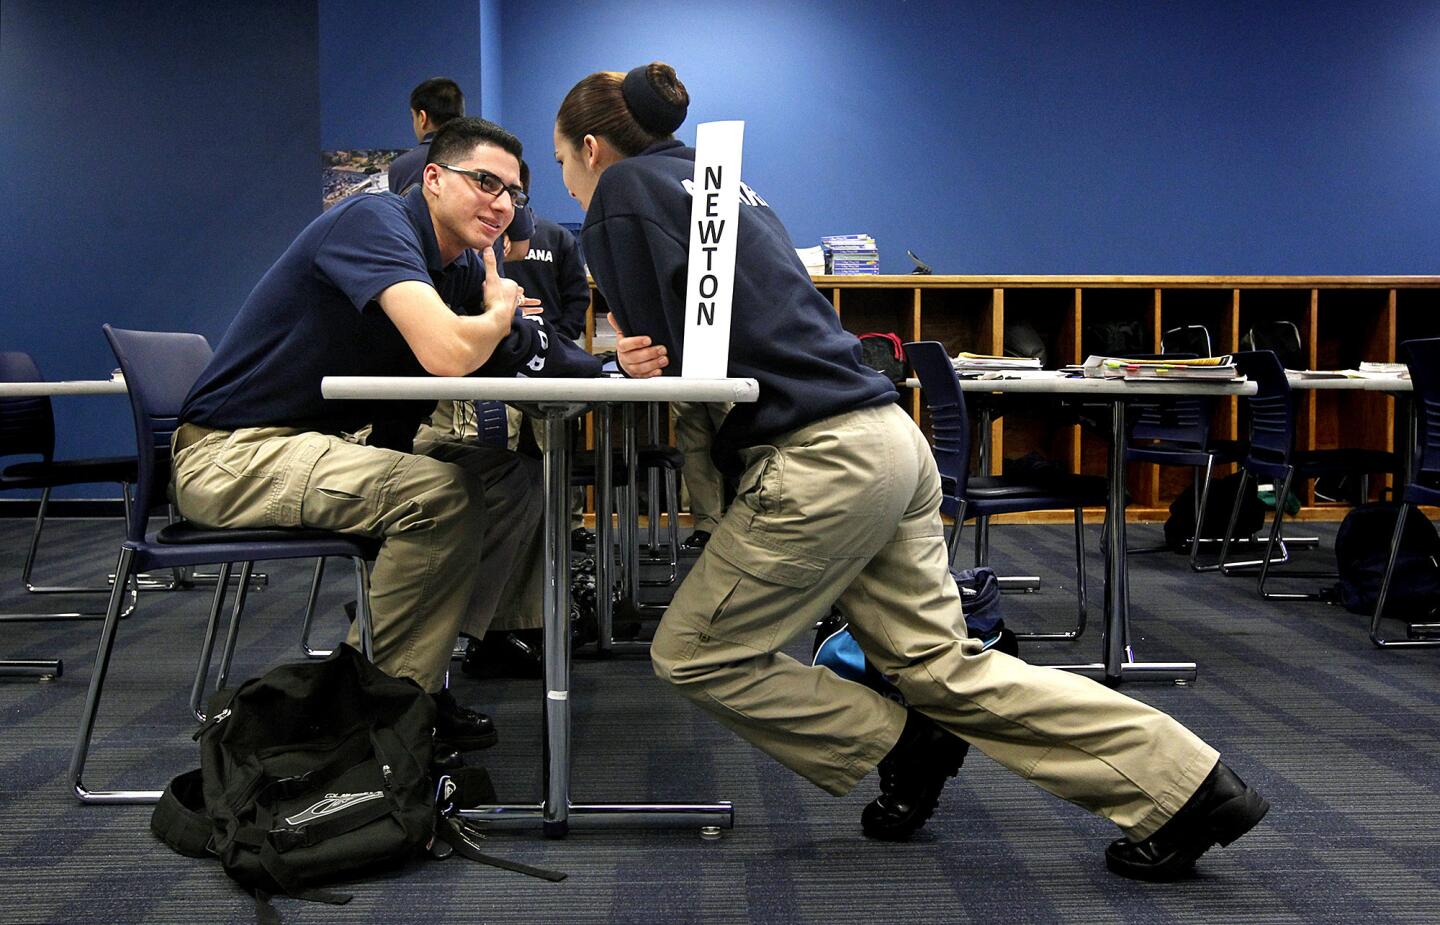 Jesus Torres, left, and Natalie Aguirre, students in the Police Orientation Preparation Program, chat during lunch break.